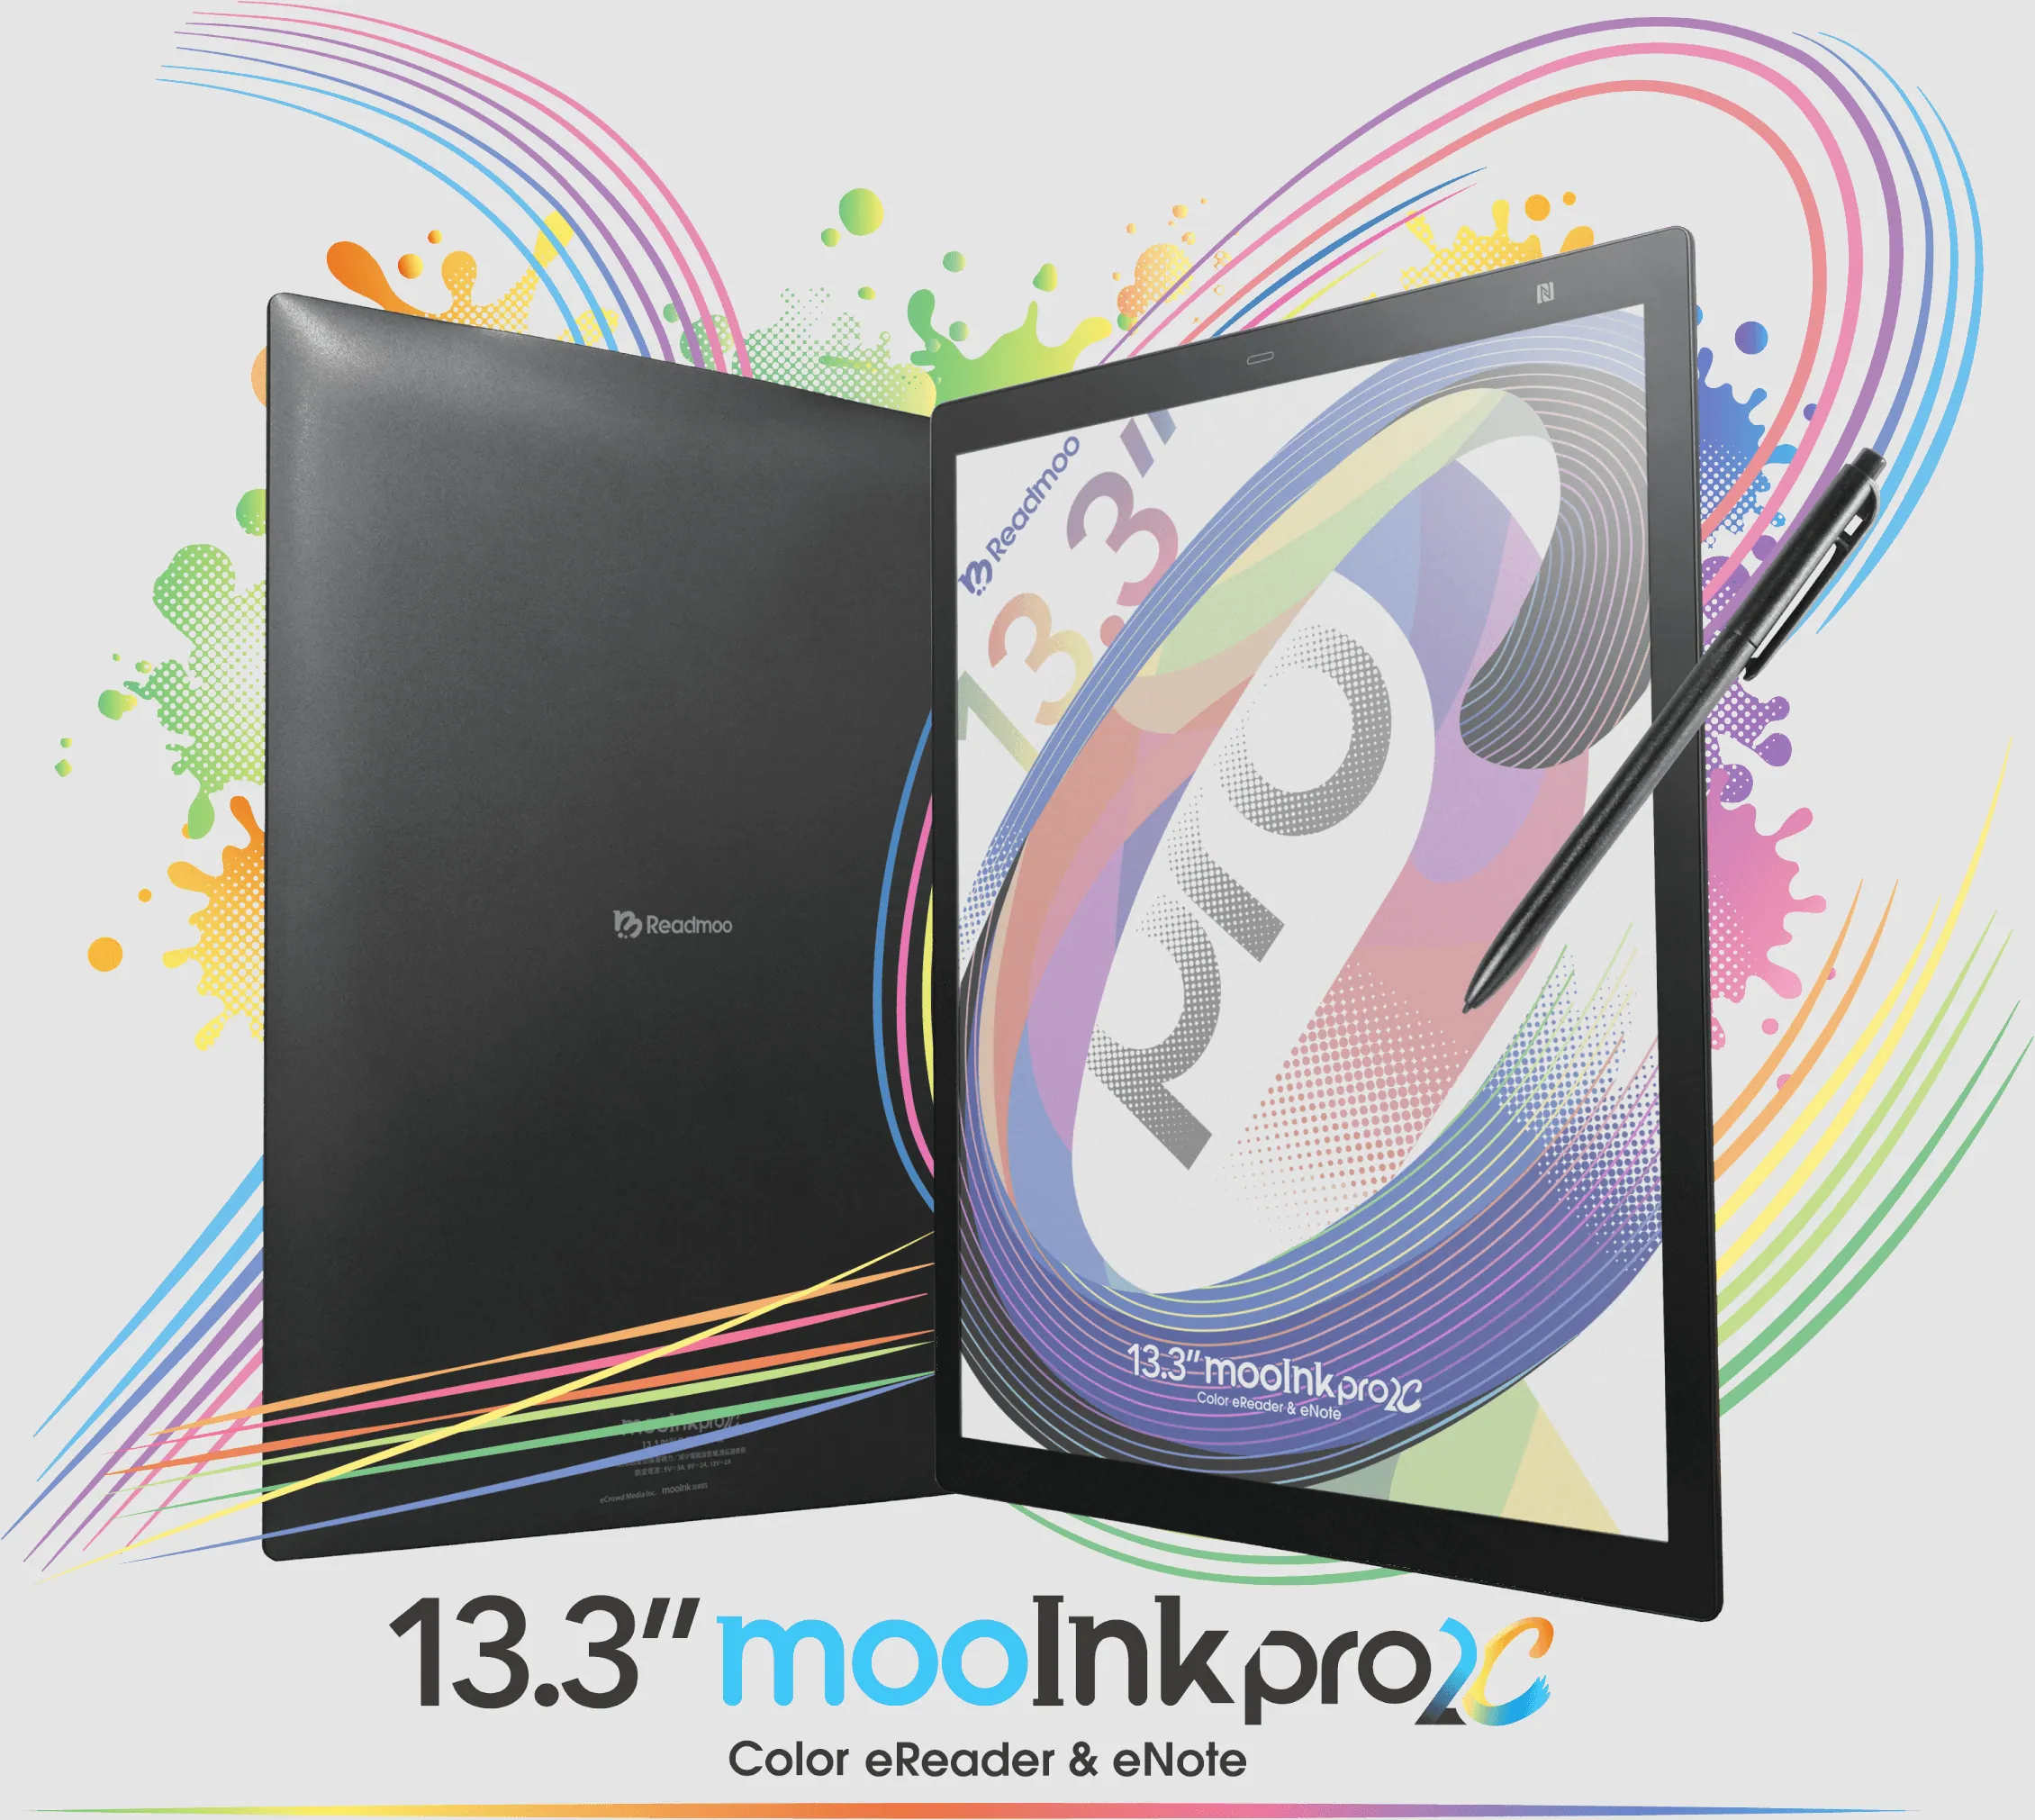 Readmoo mooInk pro 2C Color – Large 13,3-inch eReader and eNote